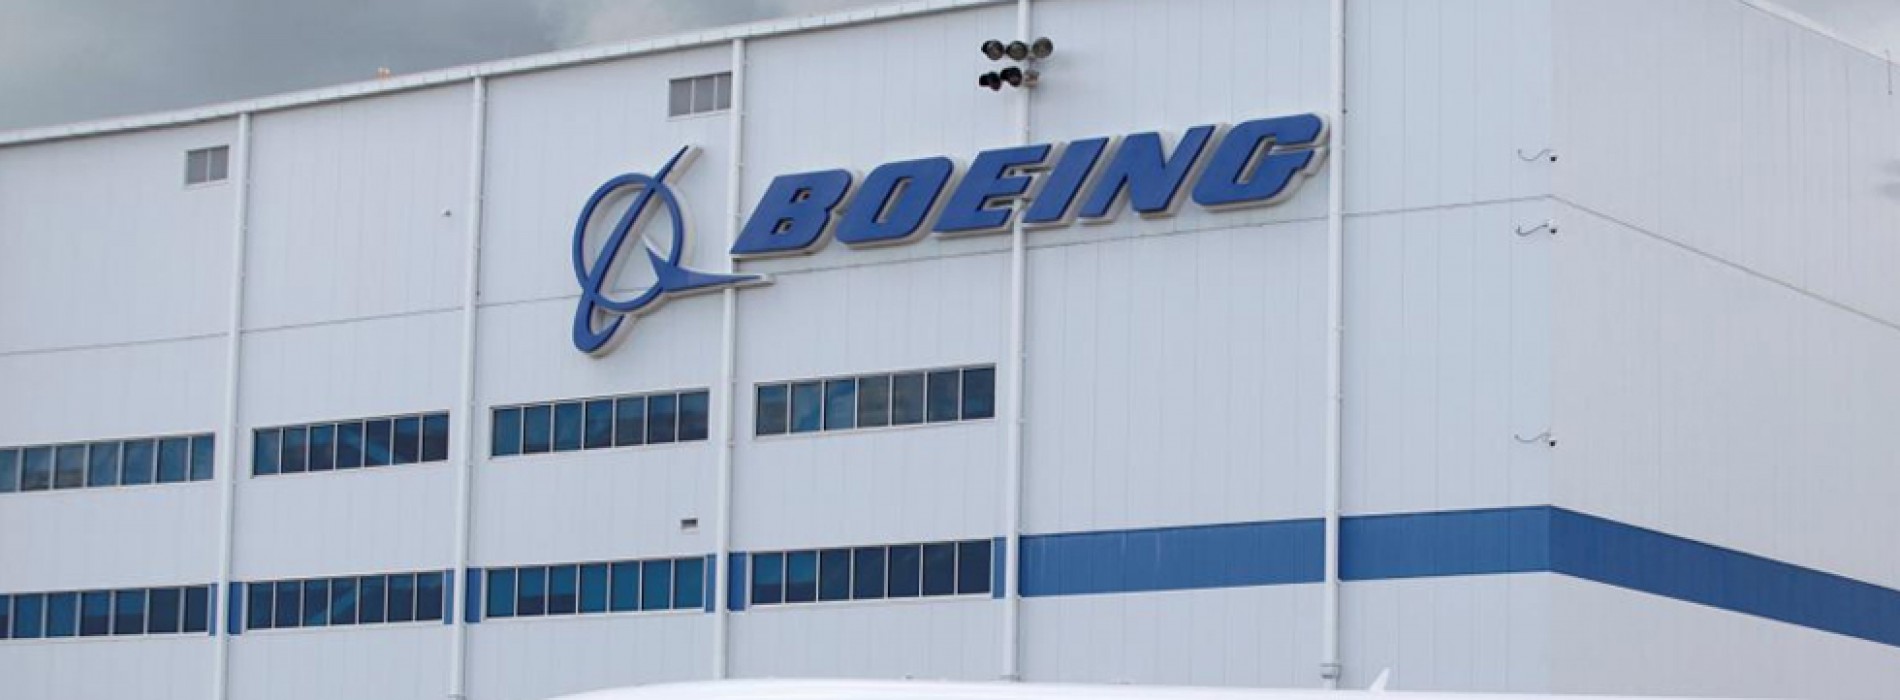 India aviation sector’s growth may drop to 12% in 2018, says Boeing